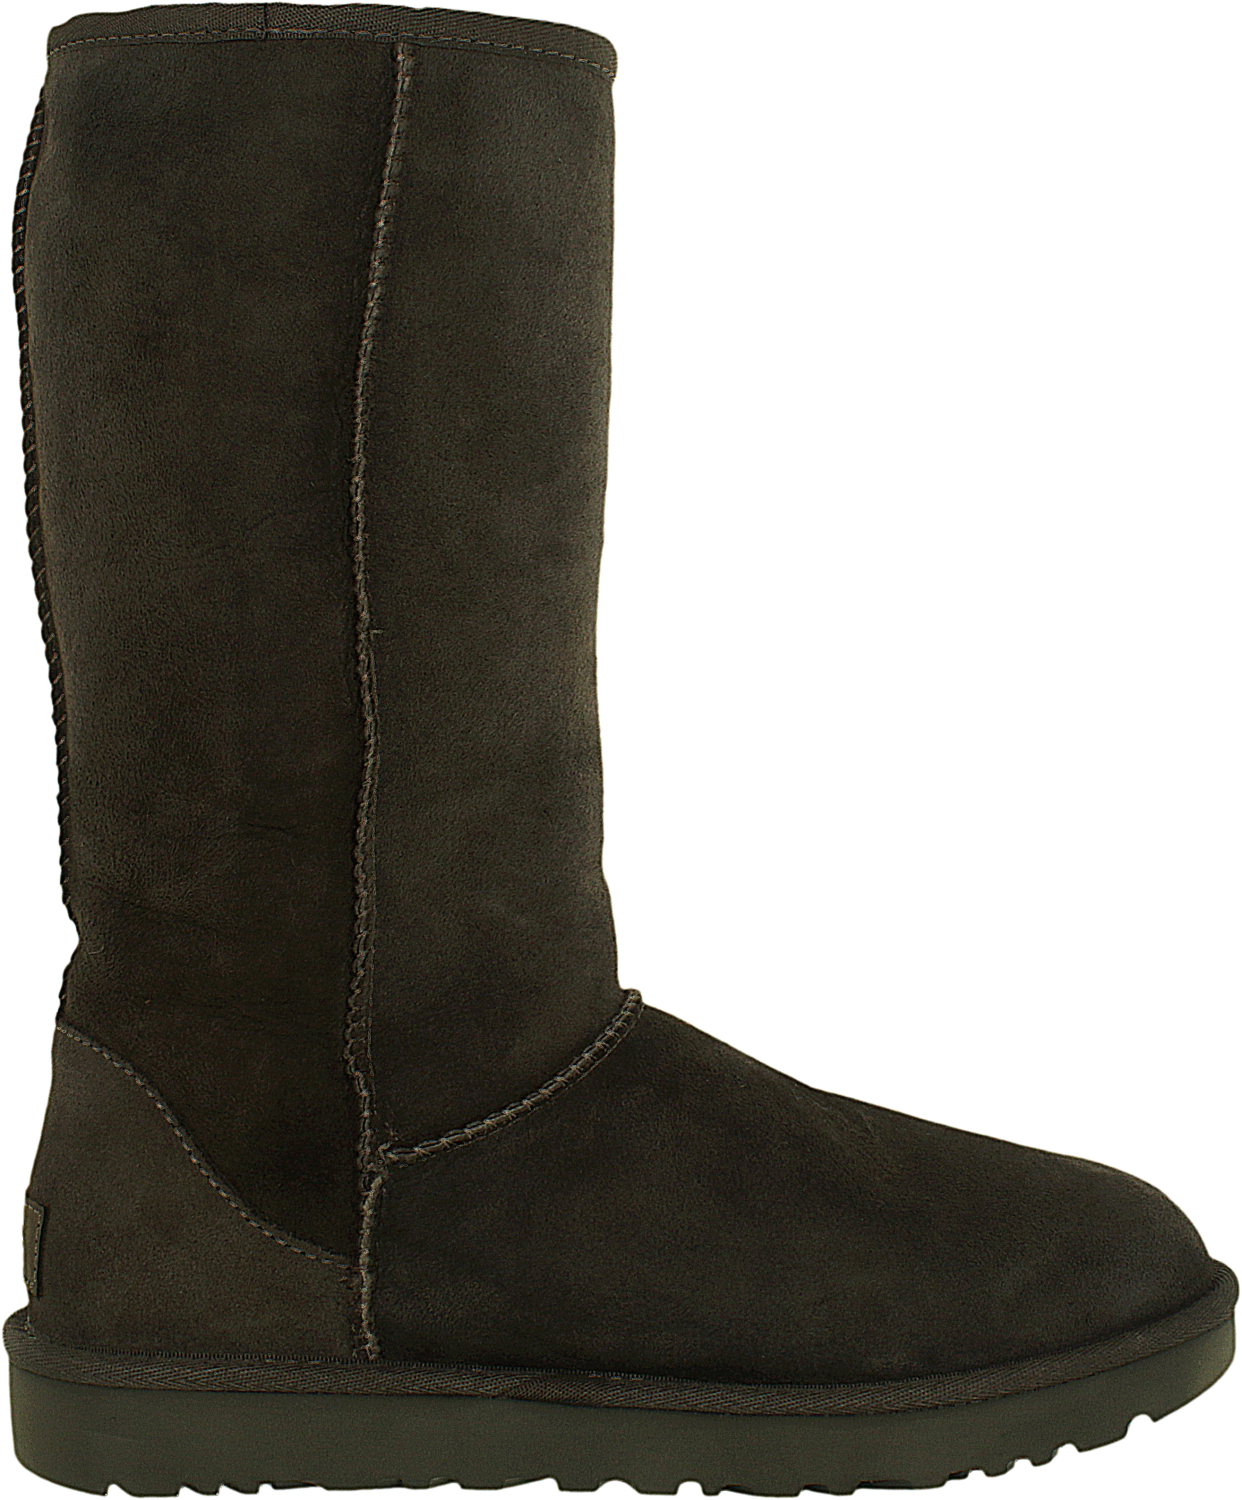 Ugg Women's Classic Tall II Leather Mid-Calf Suede Boot